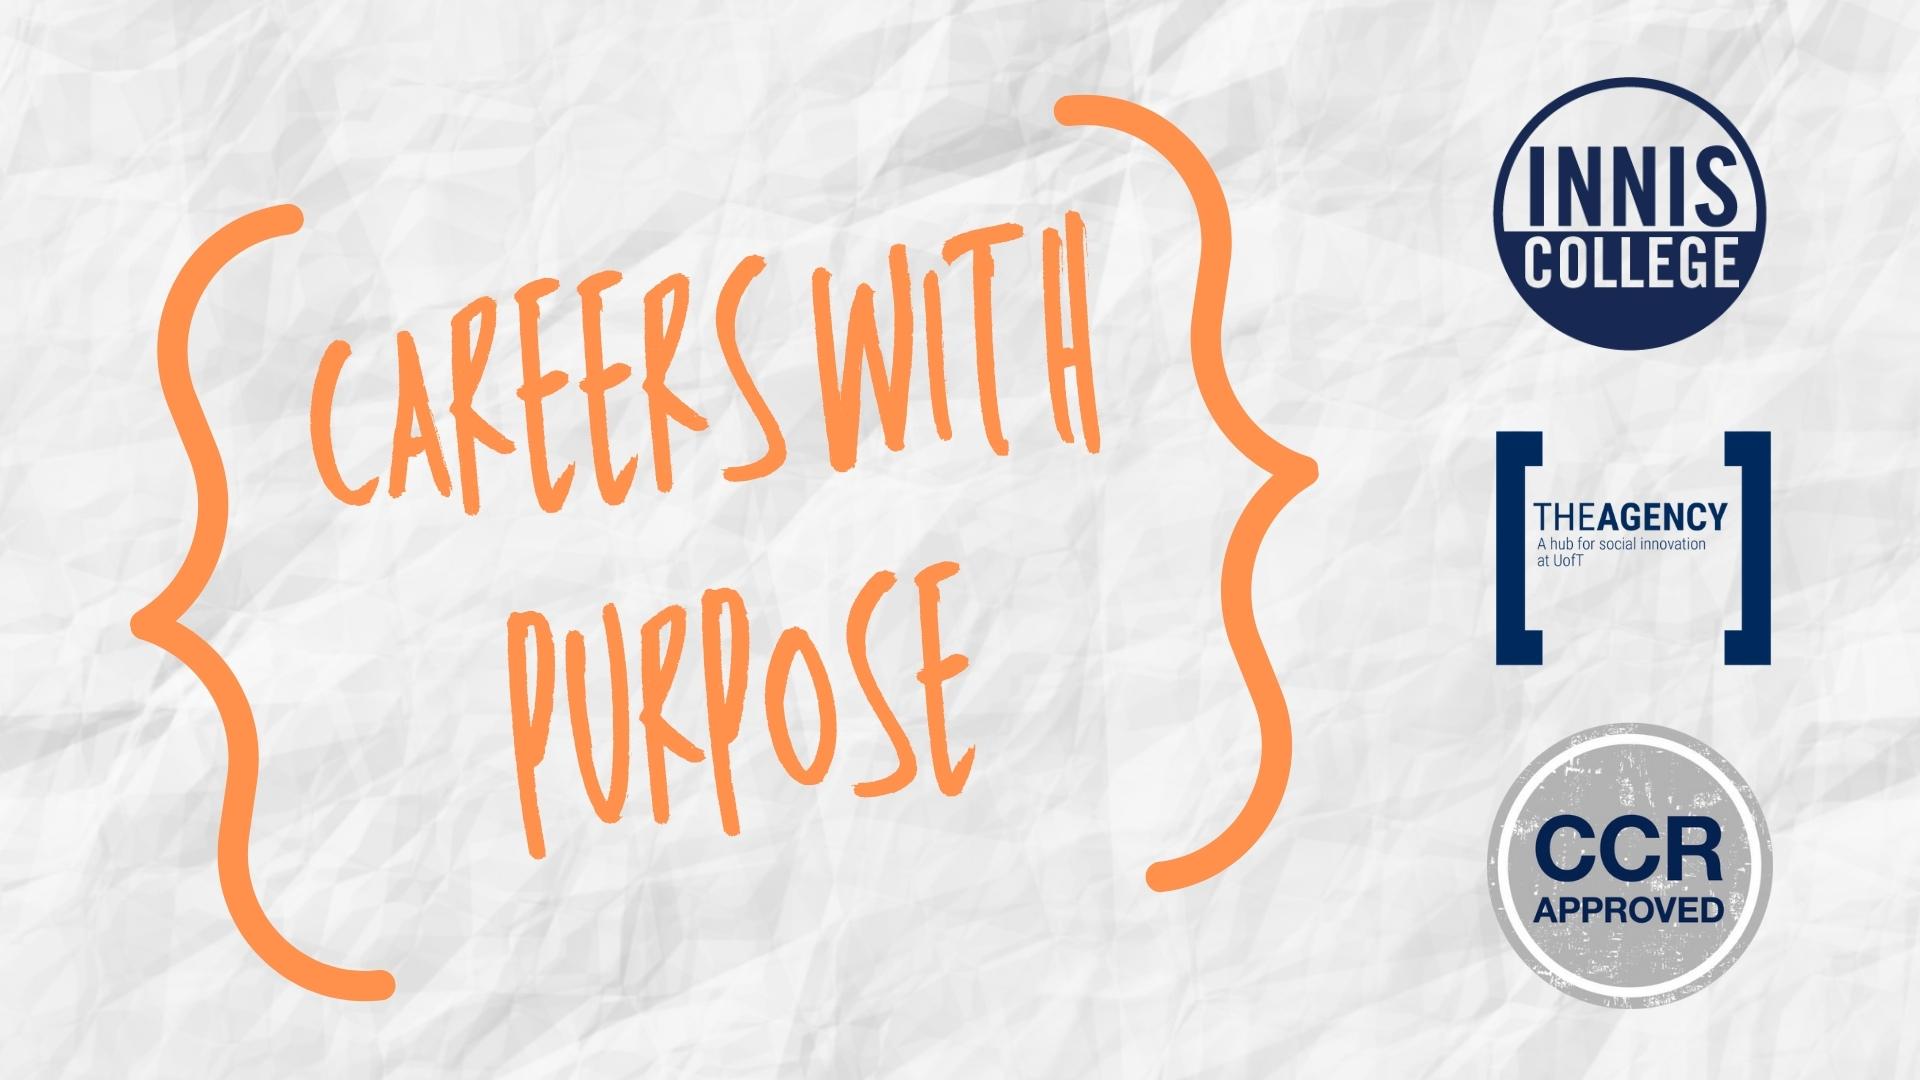 event header image with "Careers with Purpose" written in orange on a crumpled paper background